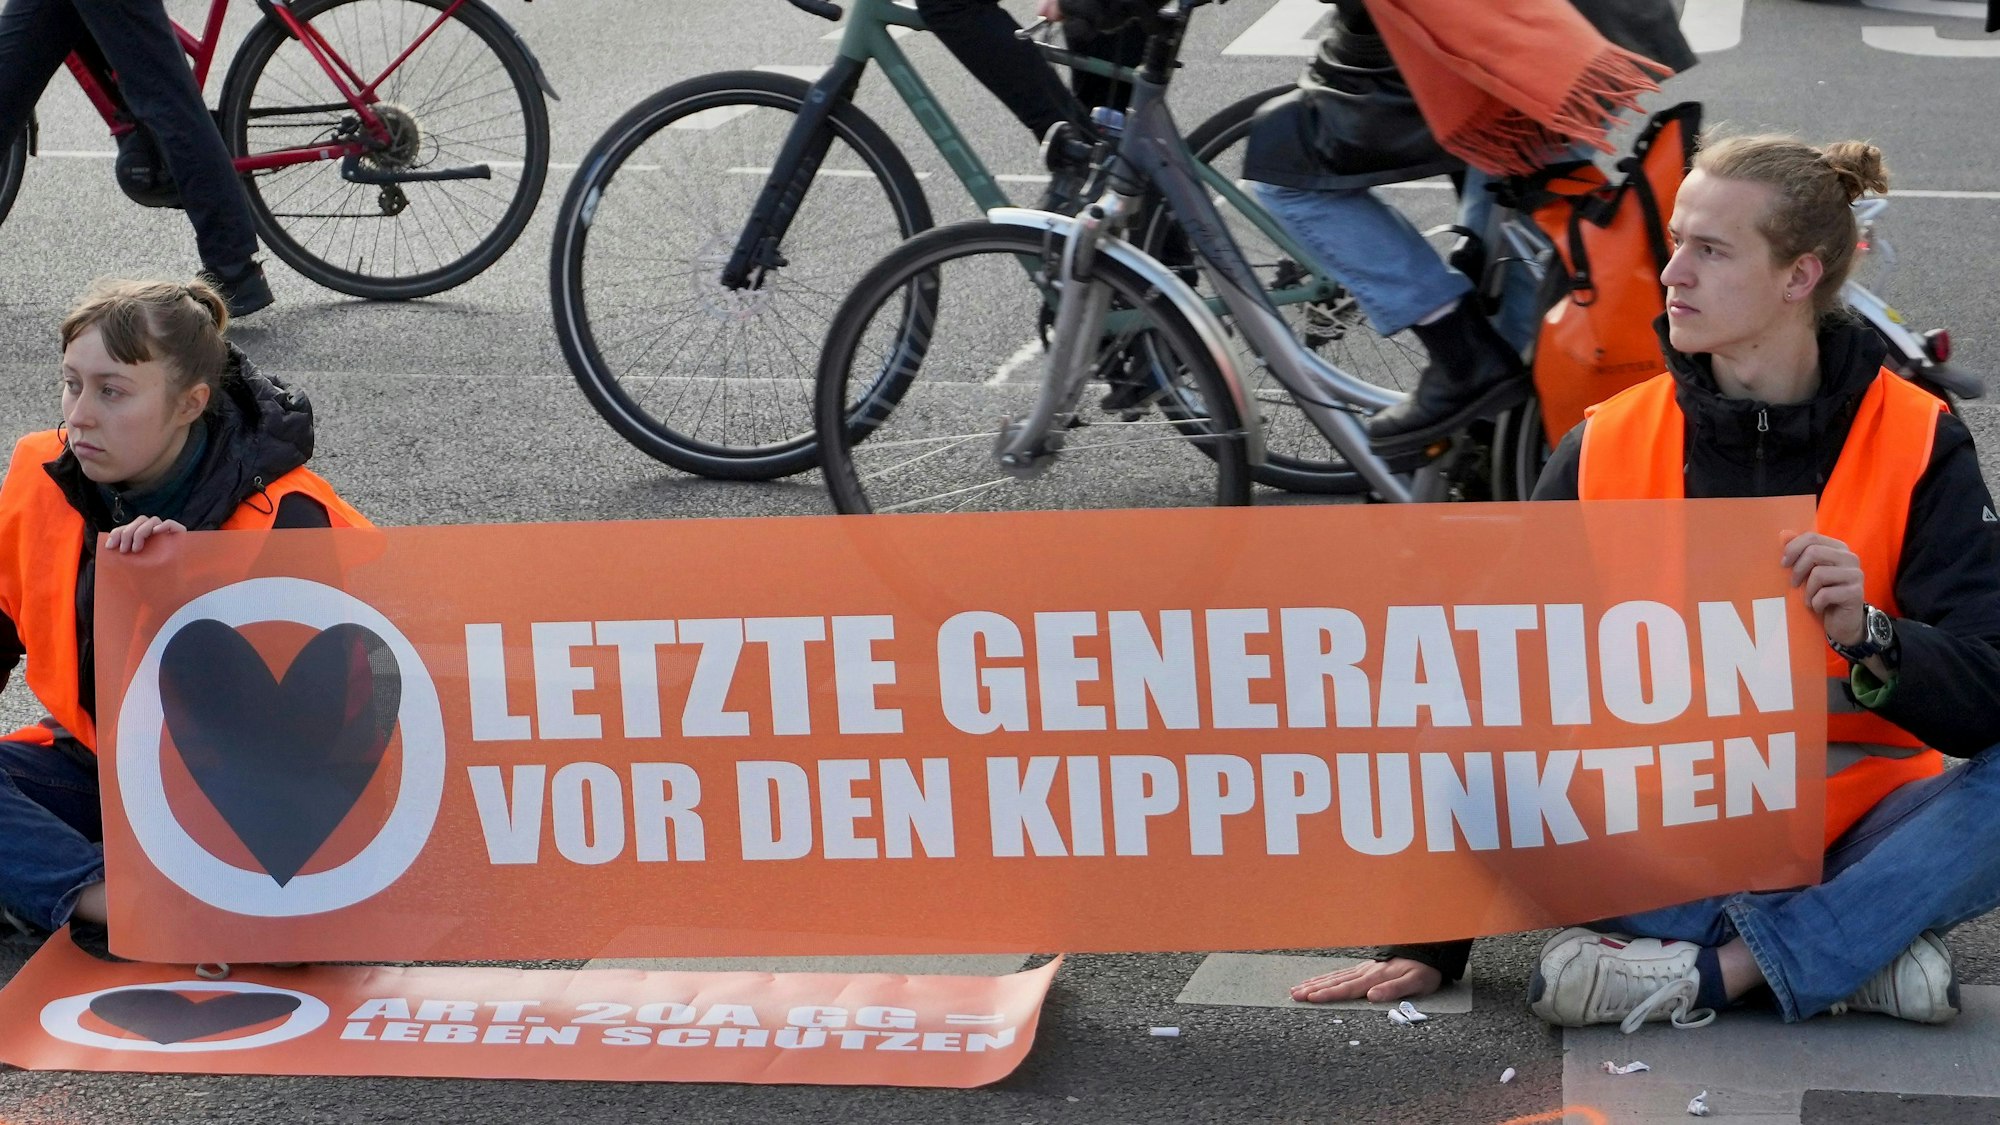 Cyclists drive unhindered past climate activists who have their hands glued to the ground during a climate protest in Berlin, Germany, Thursday, April 27, 2023. Activists of the 'Letzte Generation' (Last Generation) blocked streets in Berlin on Thursday to protest against the climate policy of the German government. (AP Photo/Michael Sohn)